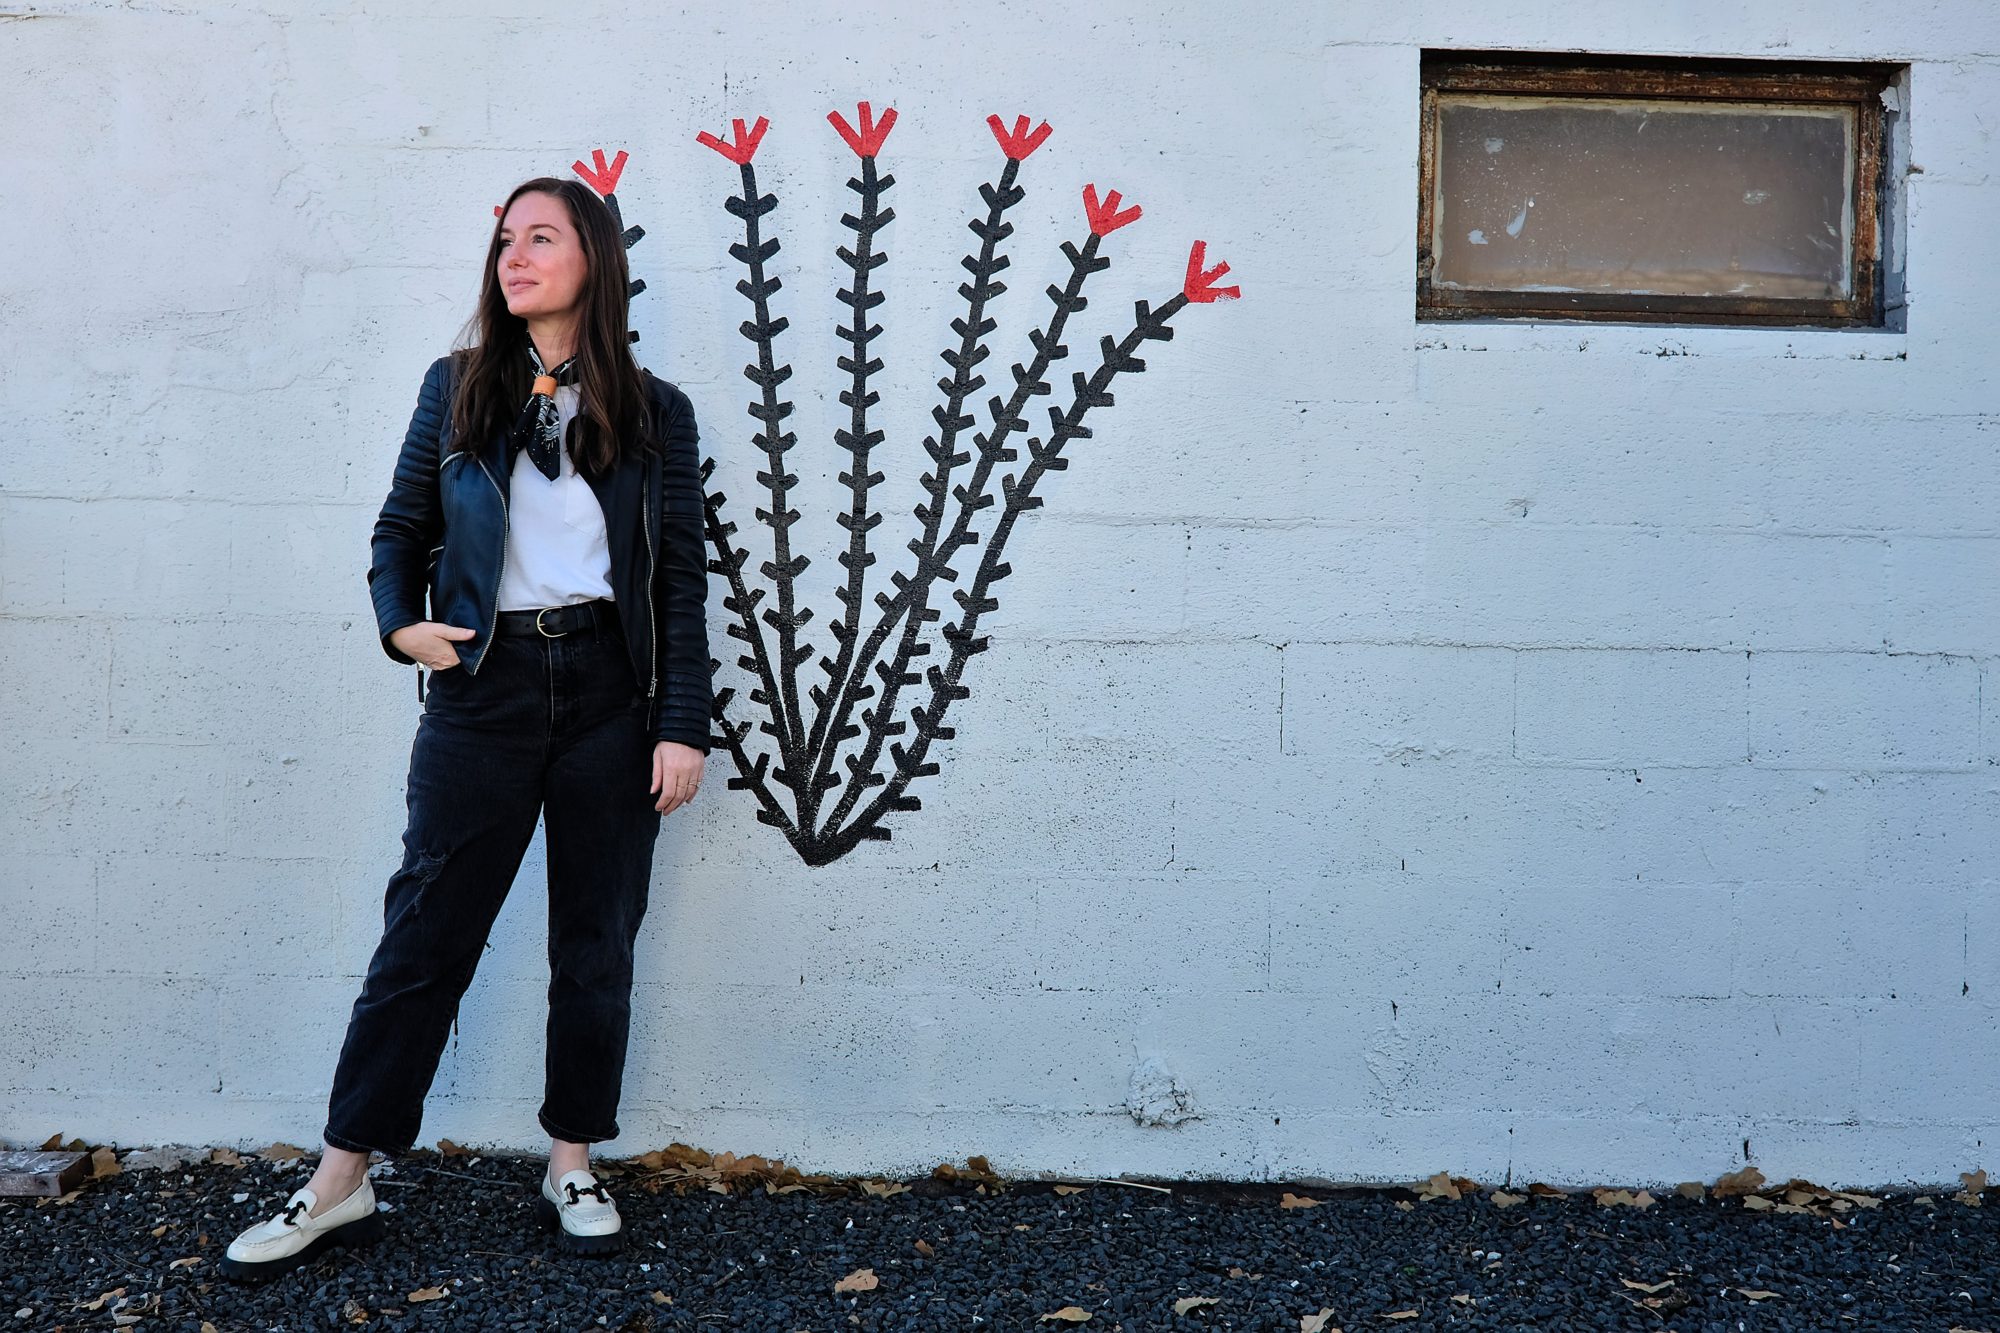 Alyssa stands in front of a cactus painting